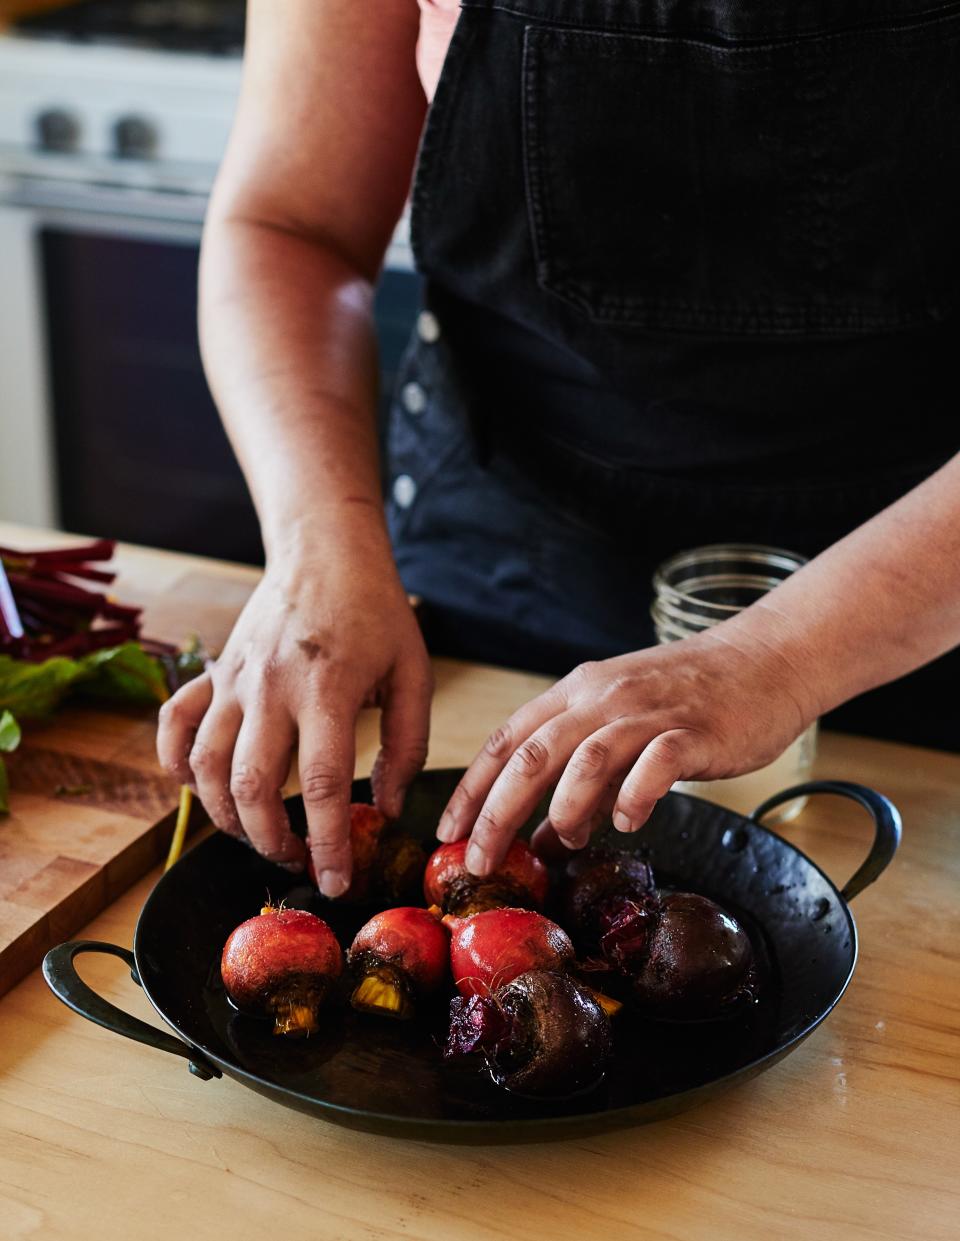 How Nosrat roasts beets: In a cast-iron skillet with a little water and covered in foil so they steam while they cook.